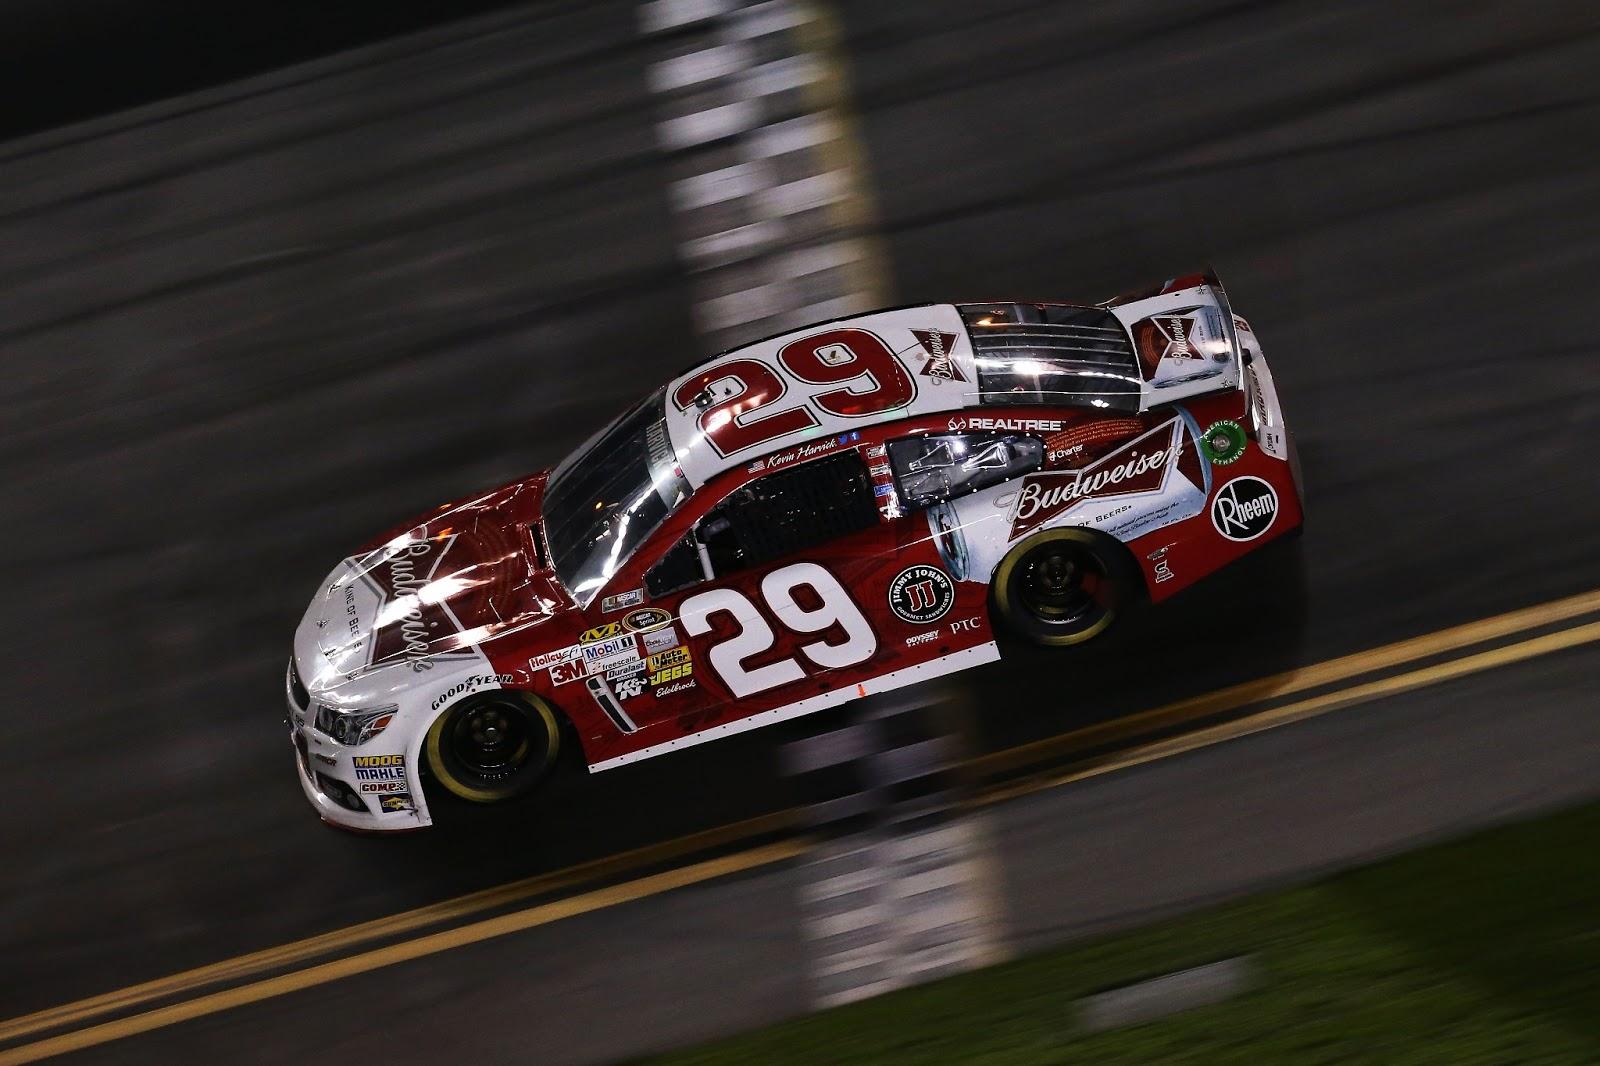 Kevin Harvick takes Budweiser car to Victory Lane in Sprint